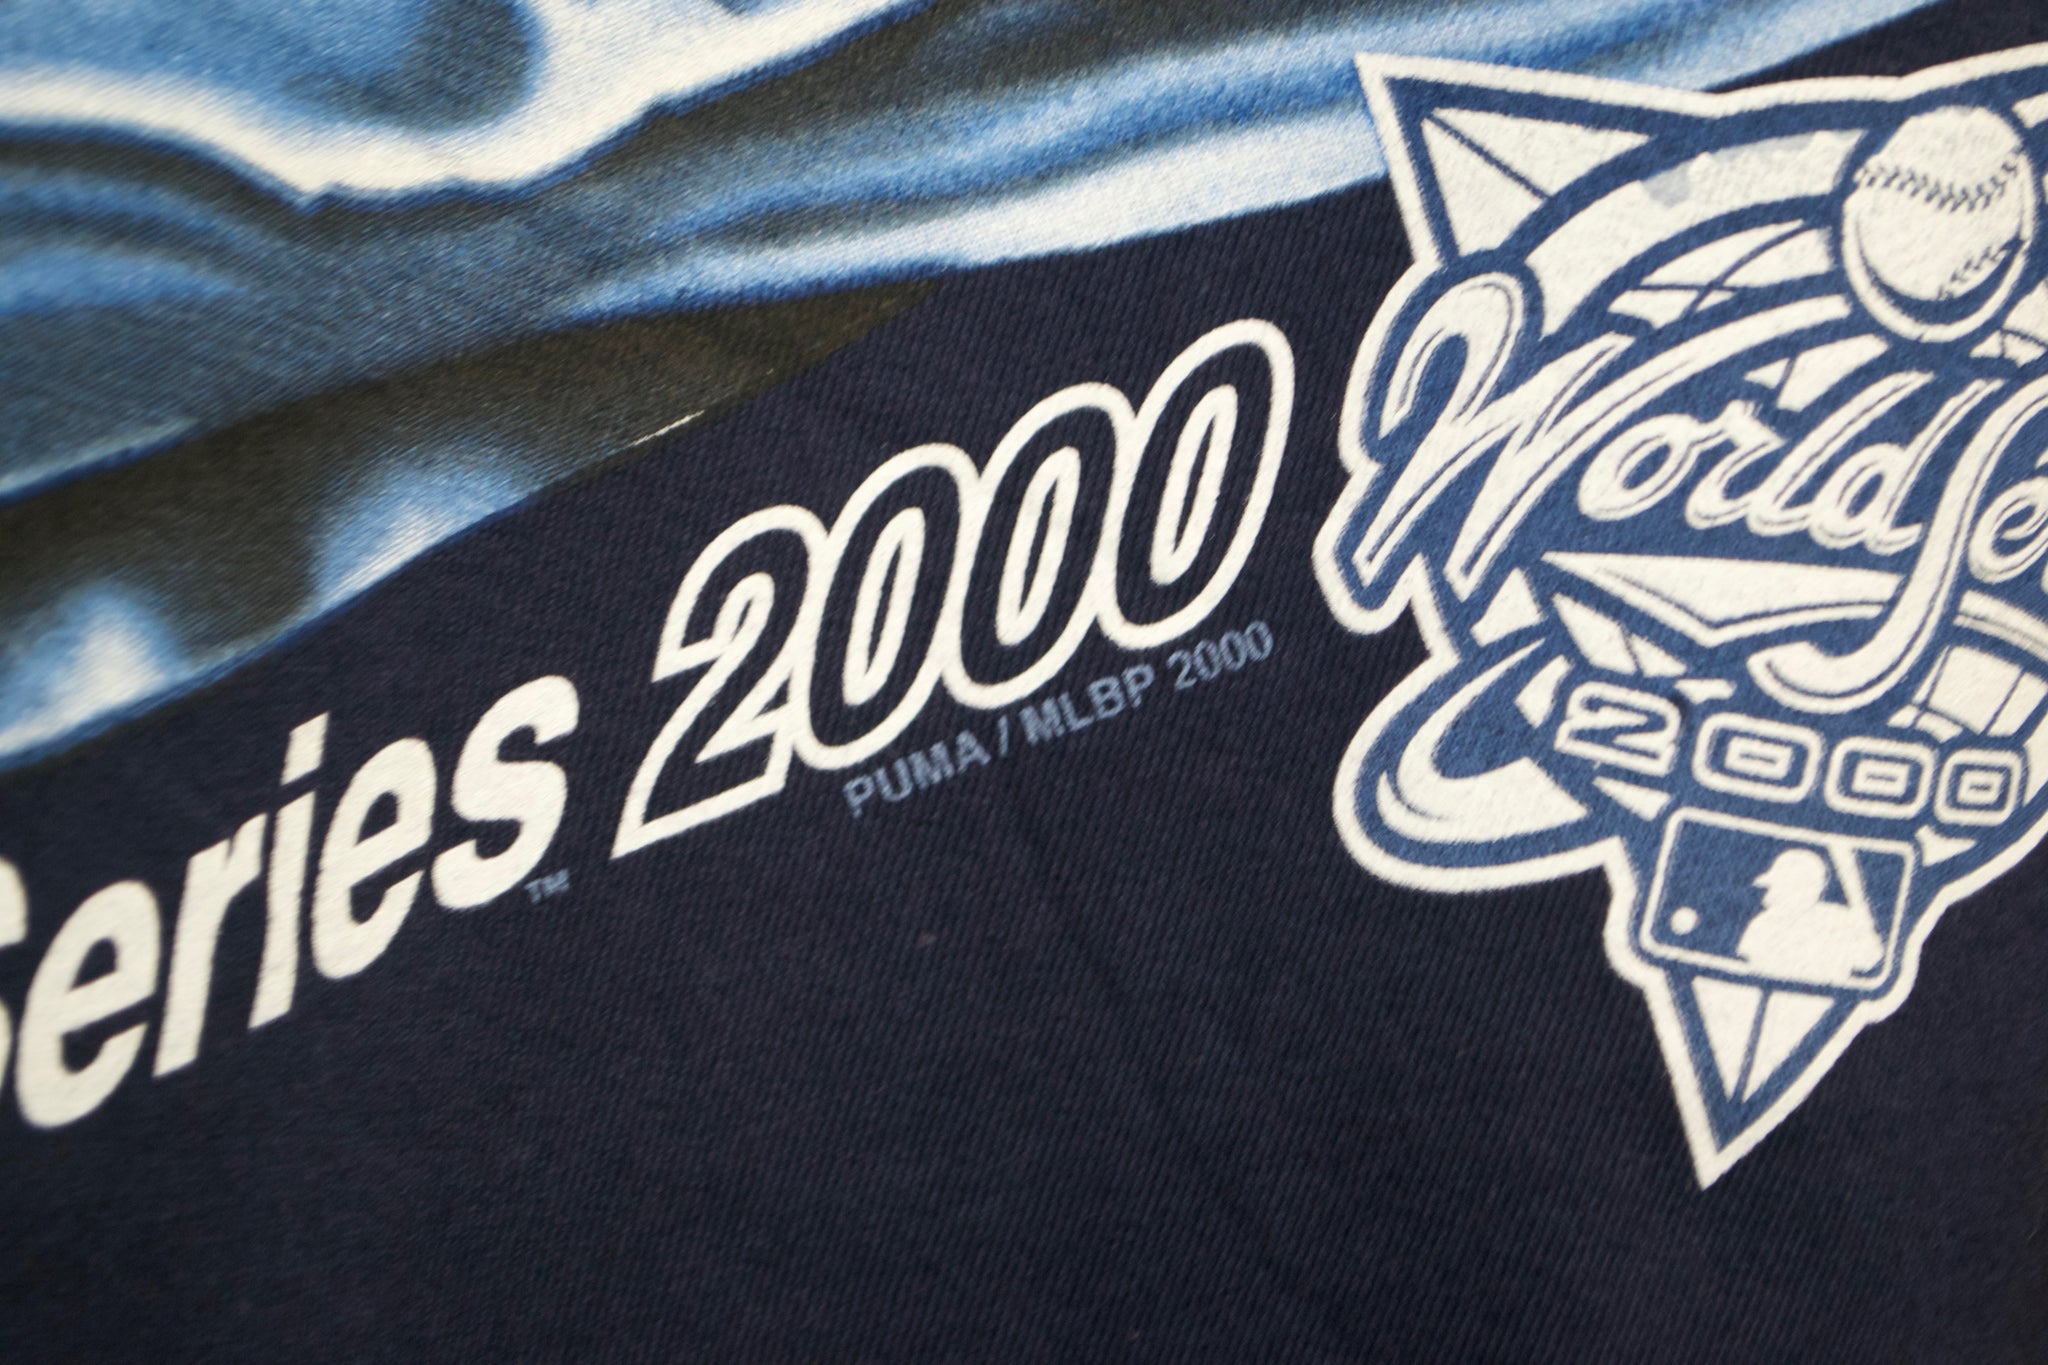 2000 New York Yankees Subway Series champions roster t shirt size